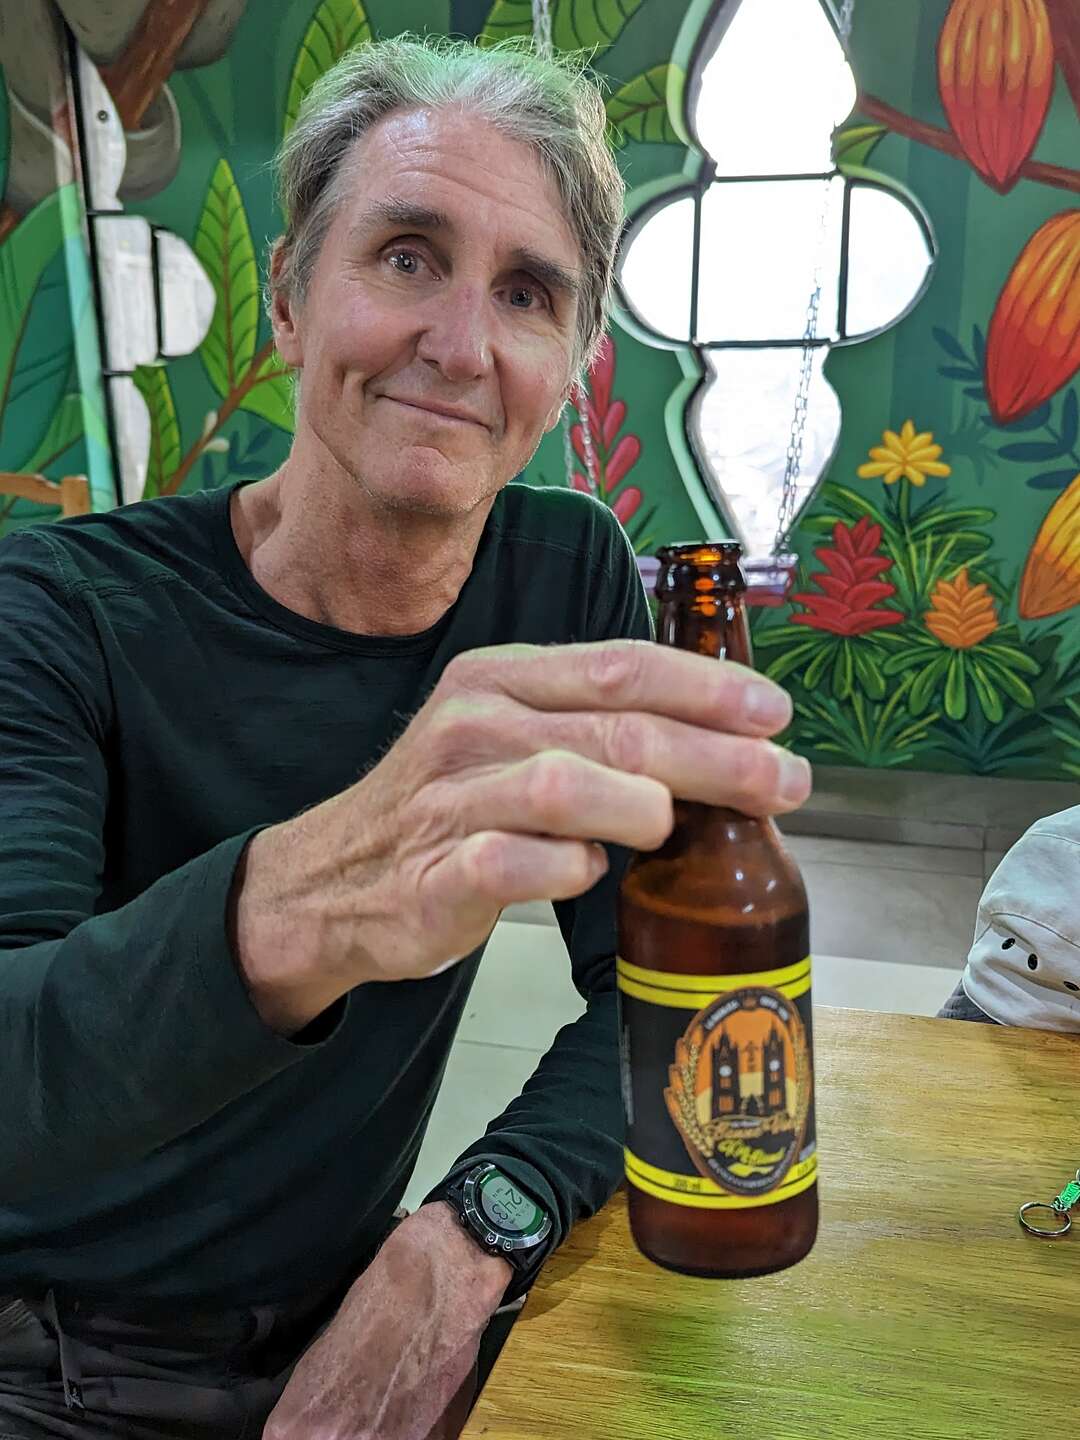 Herb enjoying his first beer in a basilica